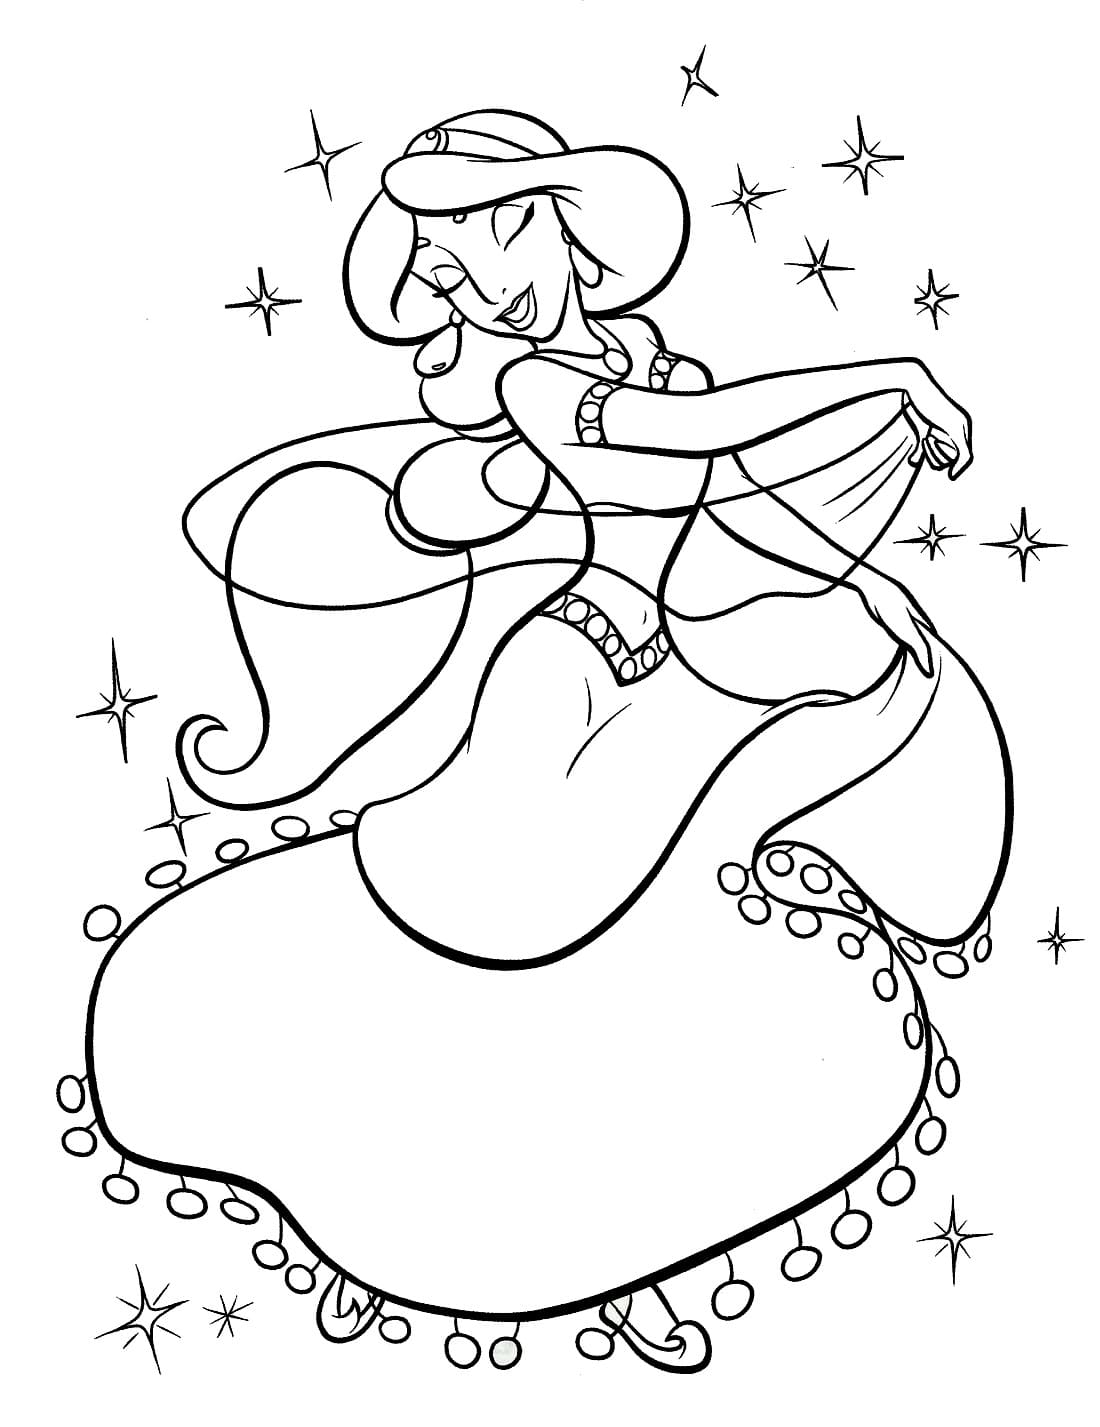 Jasmine 46  coloring pages to print and coloring